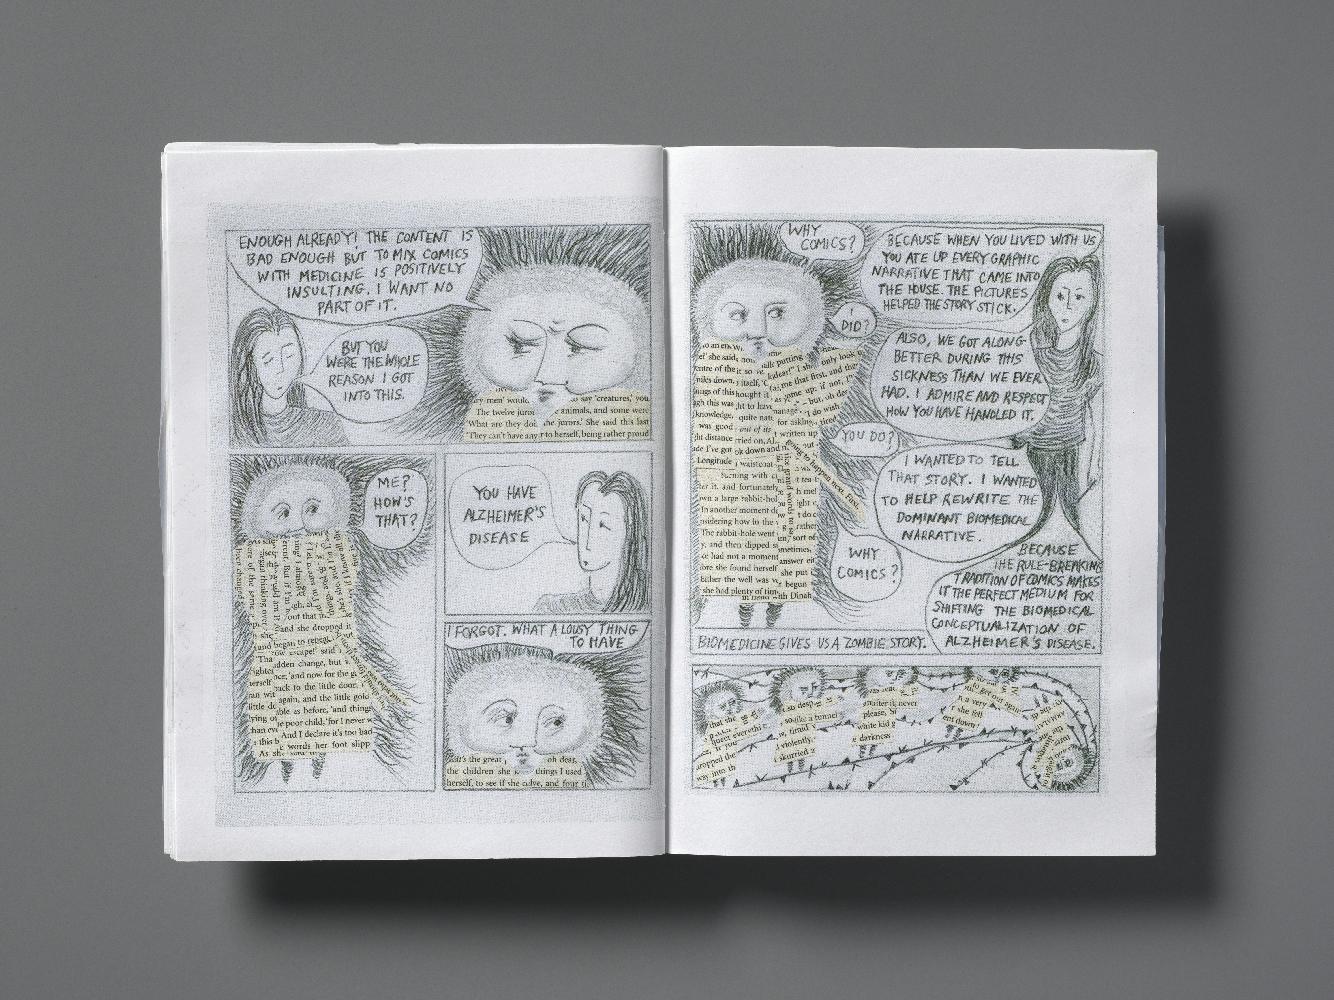 A double page spread from a comic-zine titled "Graphic Medicine and Anthropology..." The panels of the comic depict a conversation between a young woman and her mother, who has alzheimer's disease. The mother asks why her daughter makes comics about medicine and why she includes her mother in them. The daughter says it's because she wants to tell the story of how graphic stories helped her mum remember what she read and because of the rule-breaking tradition of comics, which could challenge the biomedical view of alzheimer's disease.